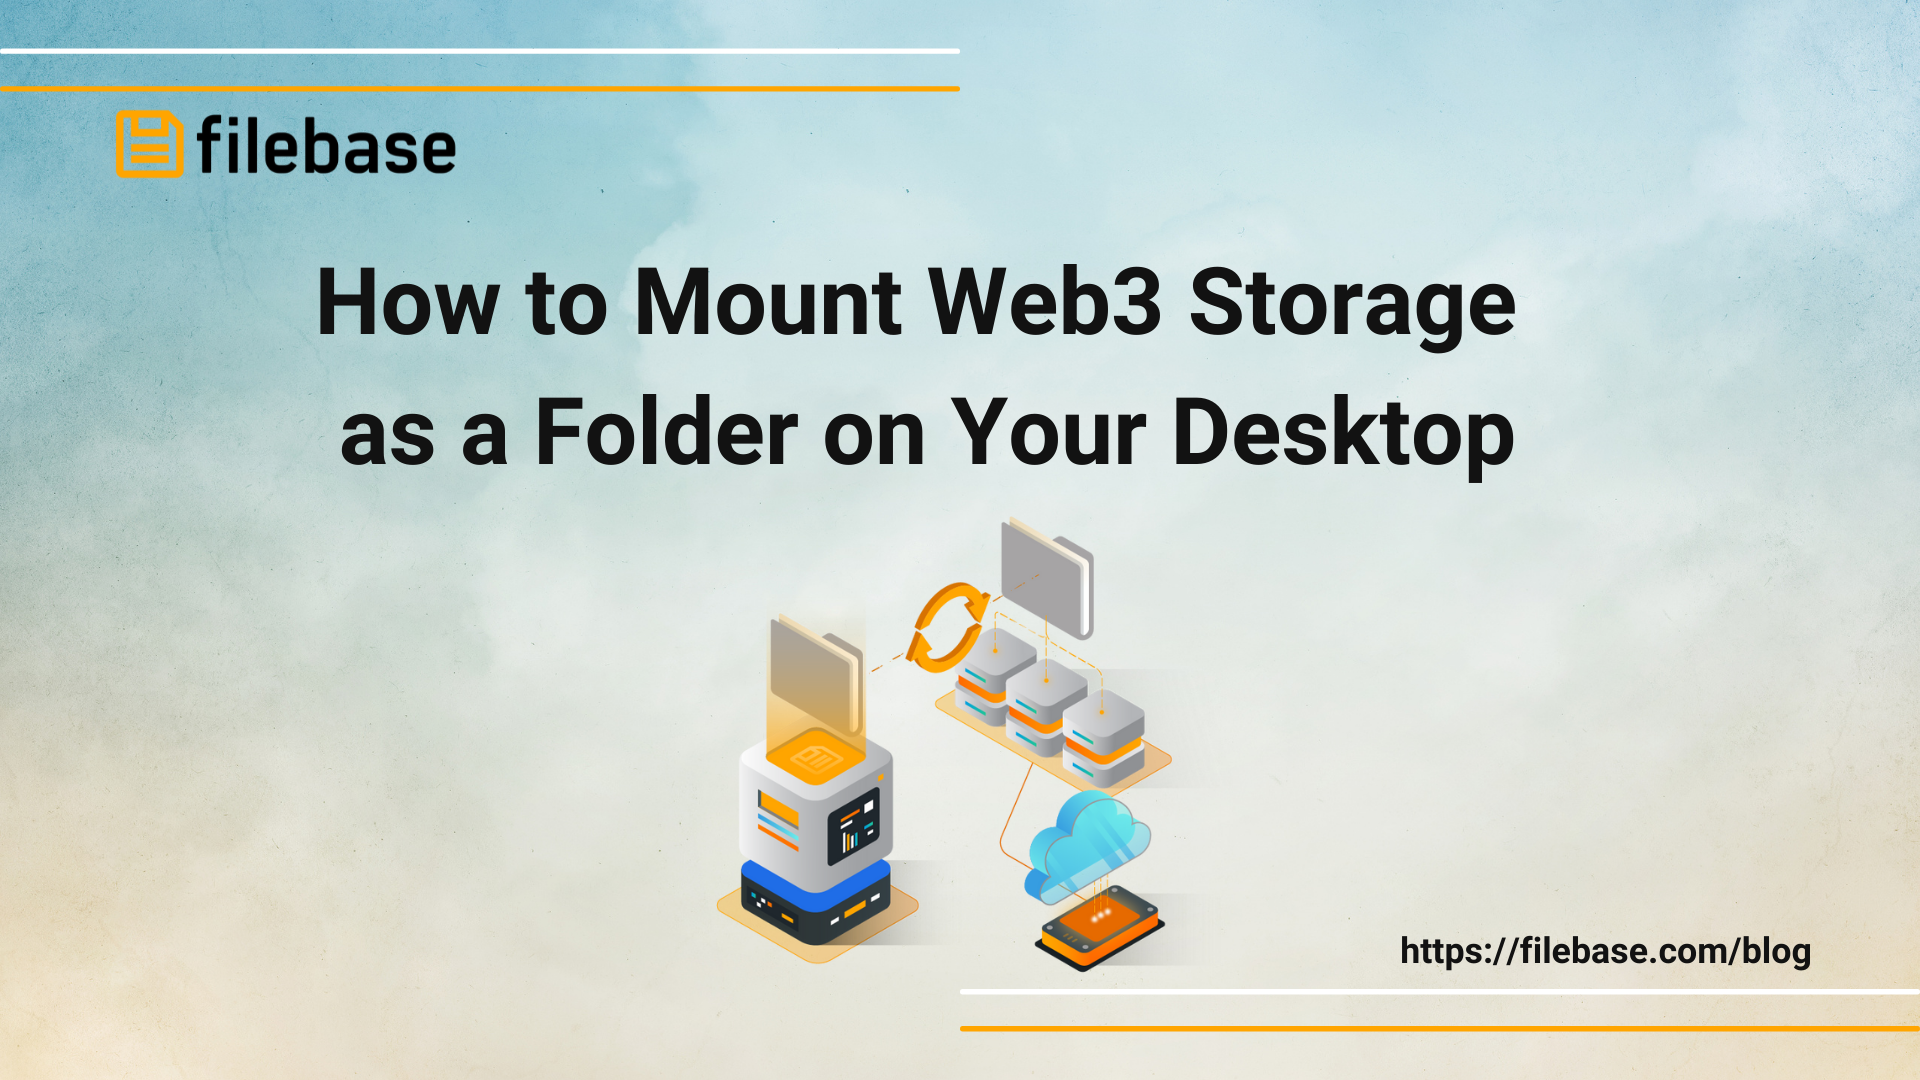 How to Mount Web3 Storage as a Folder on Your Desktop